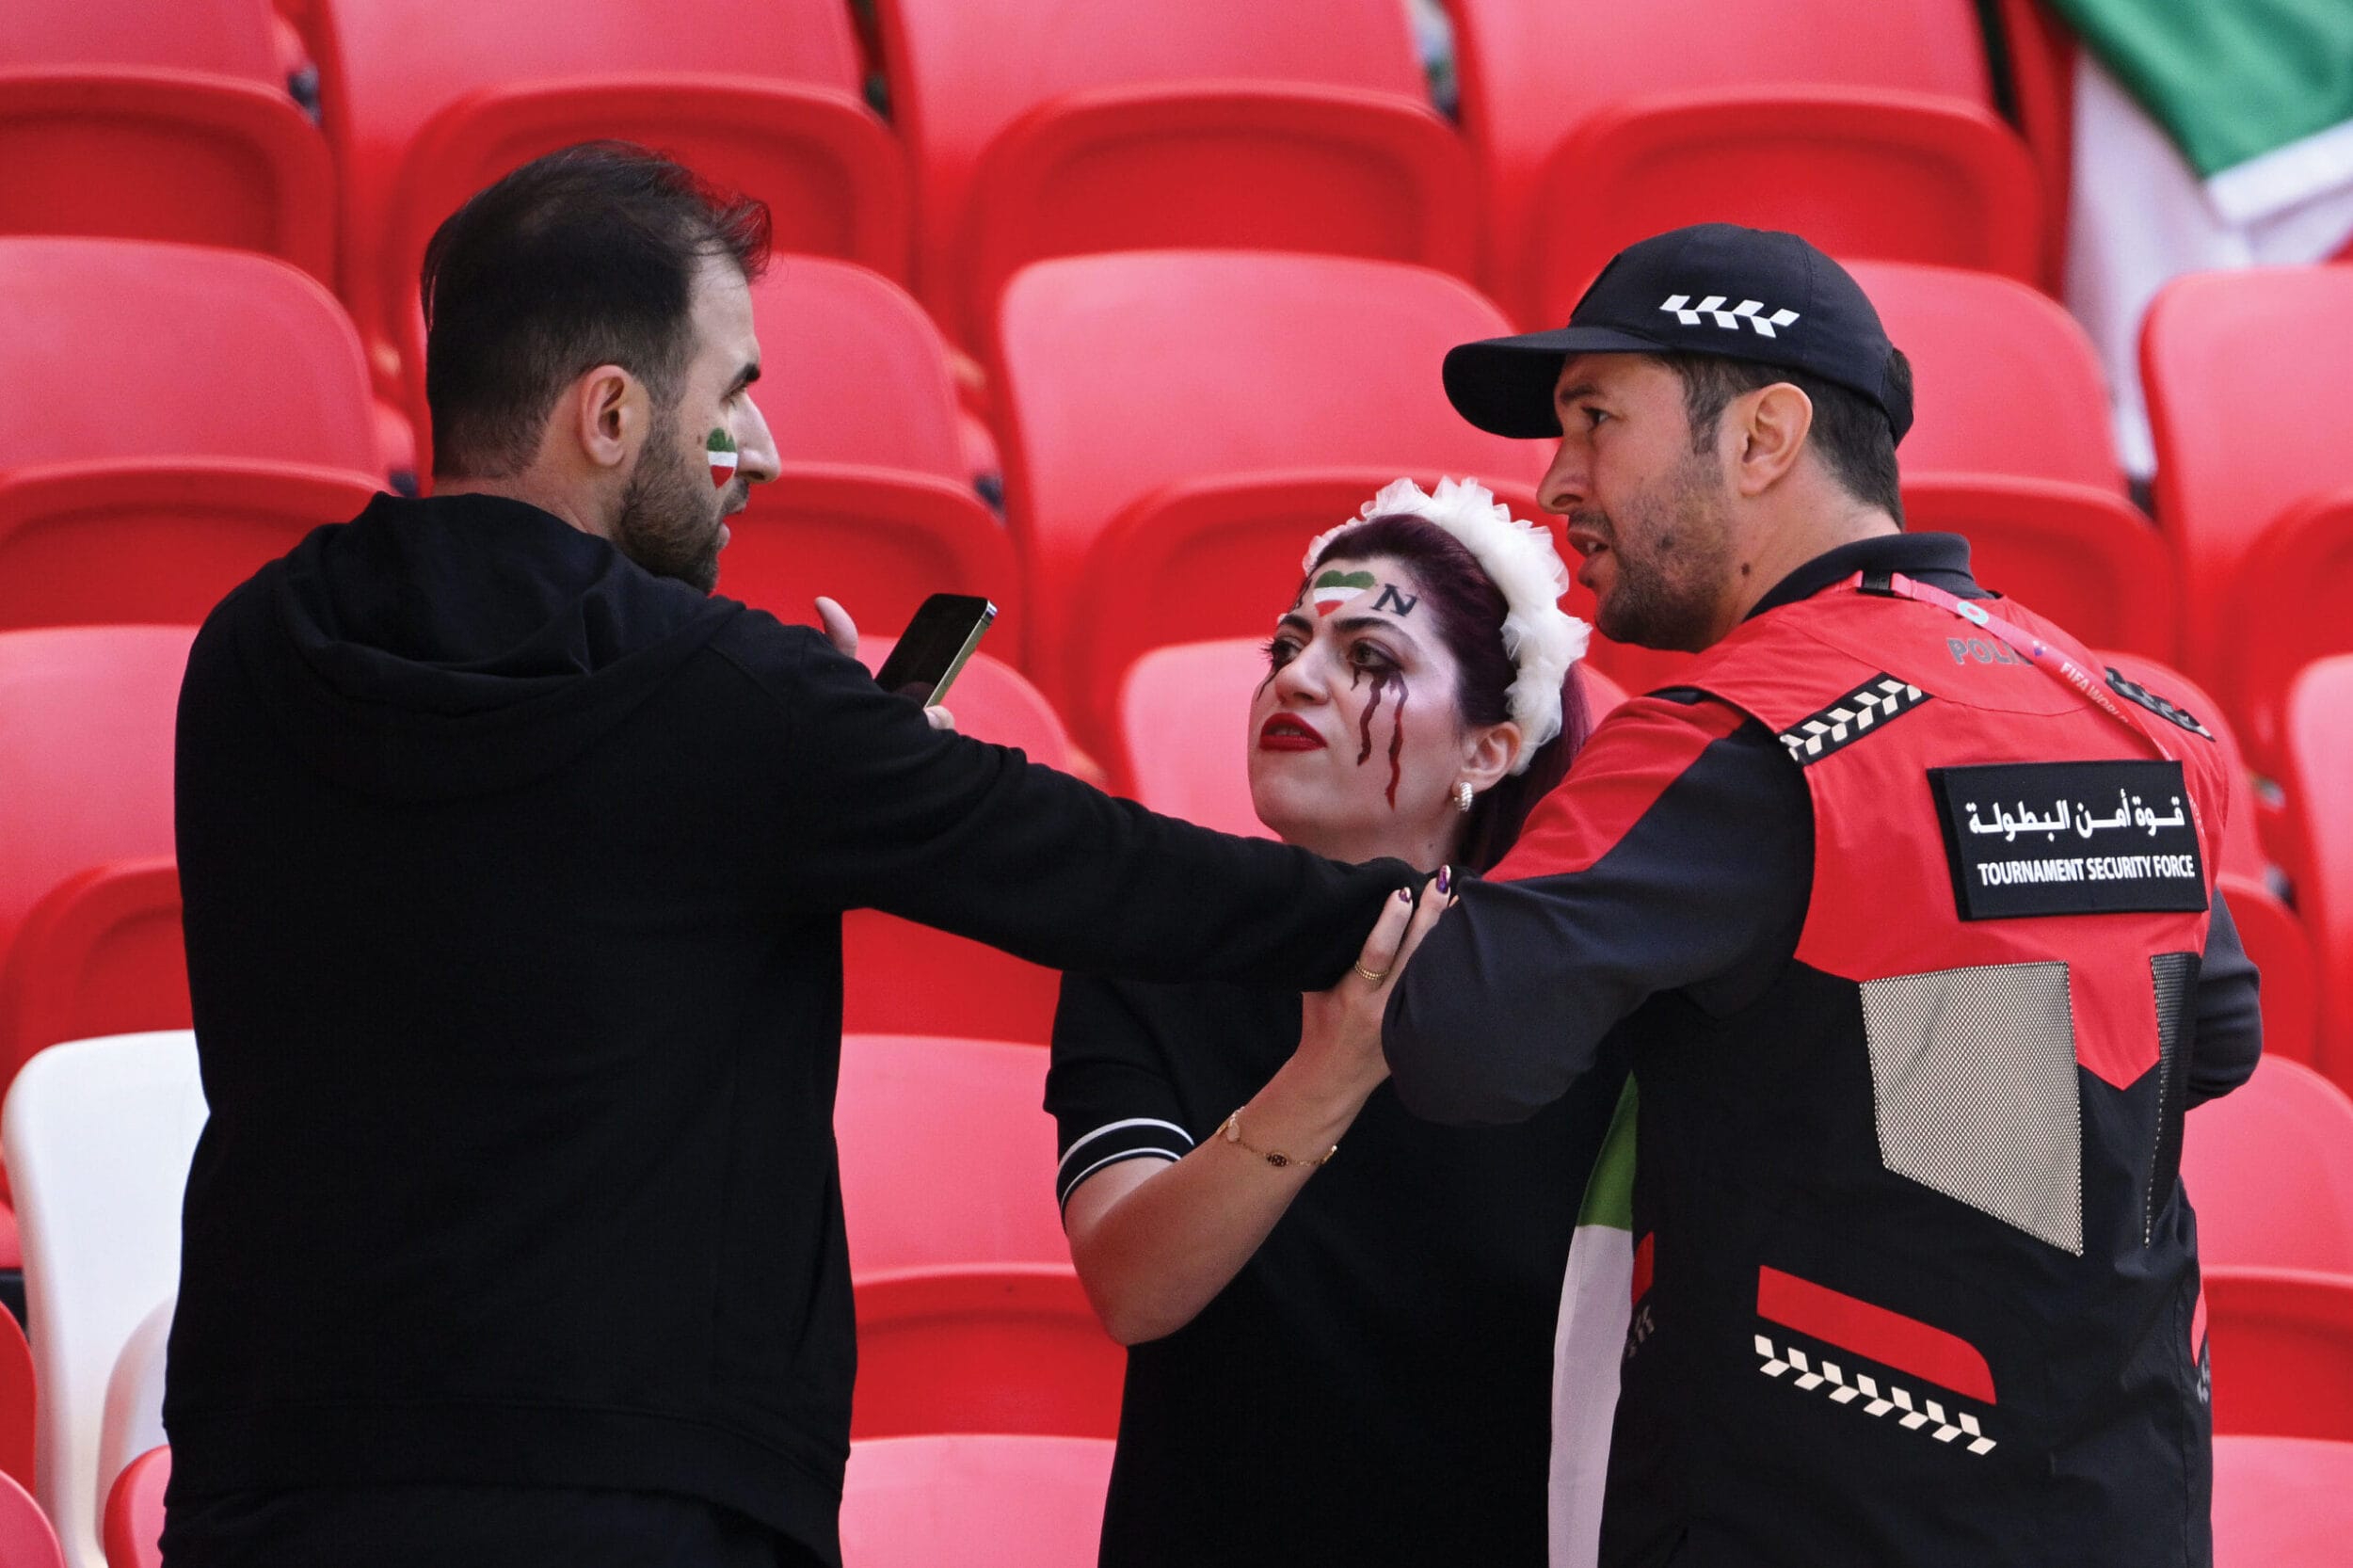  A member of security staff contronts fans at the Wales-Iran match, 25th November 2022